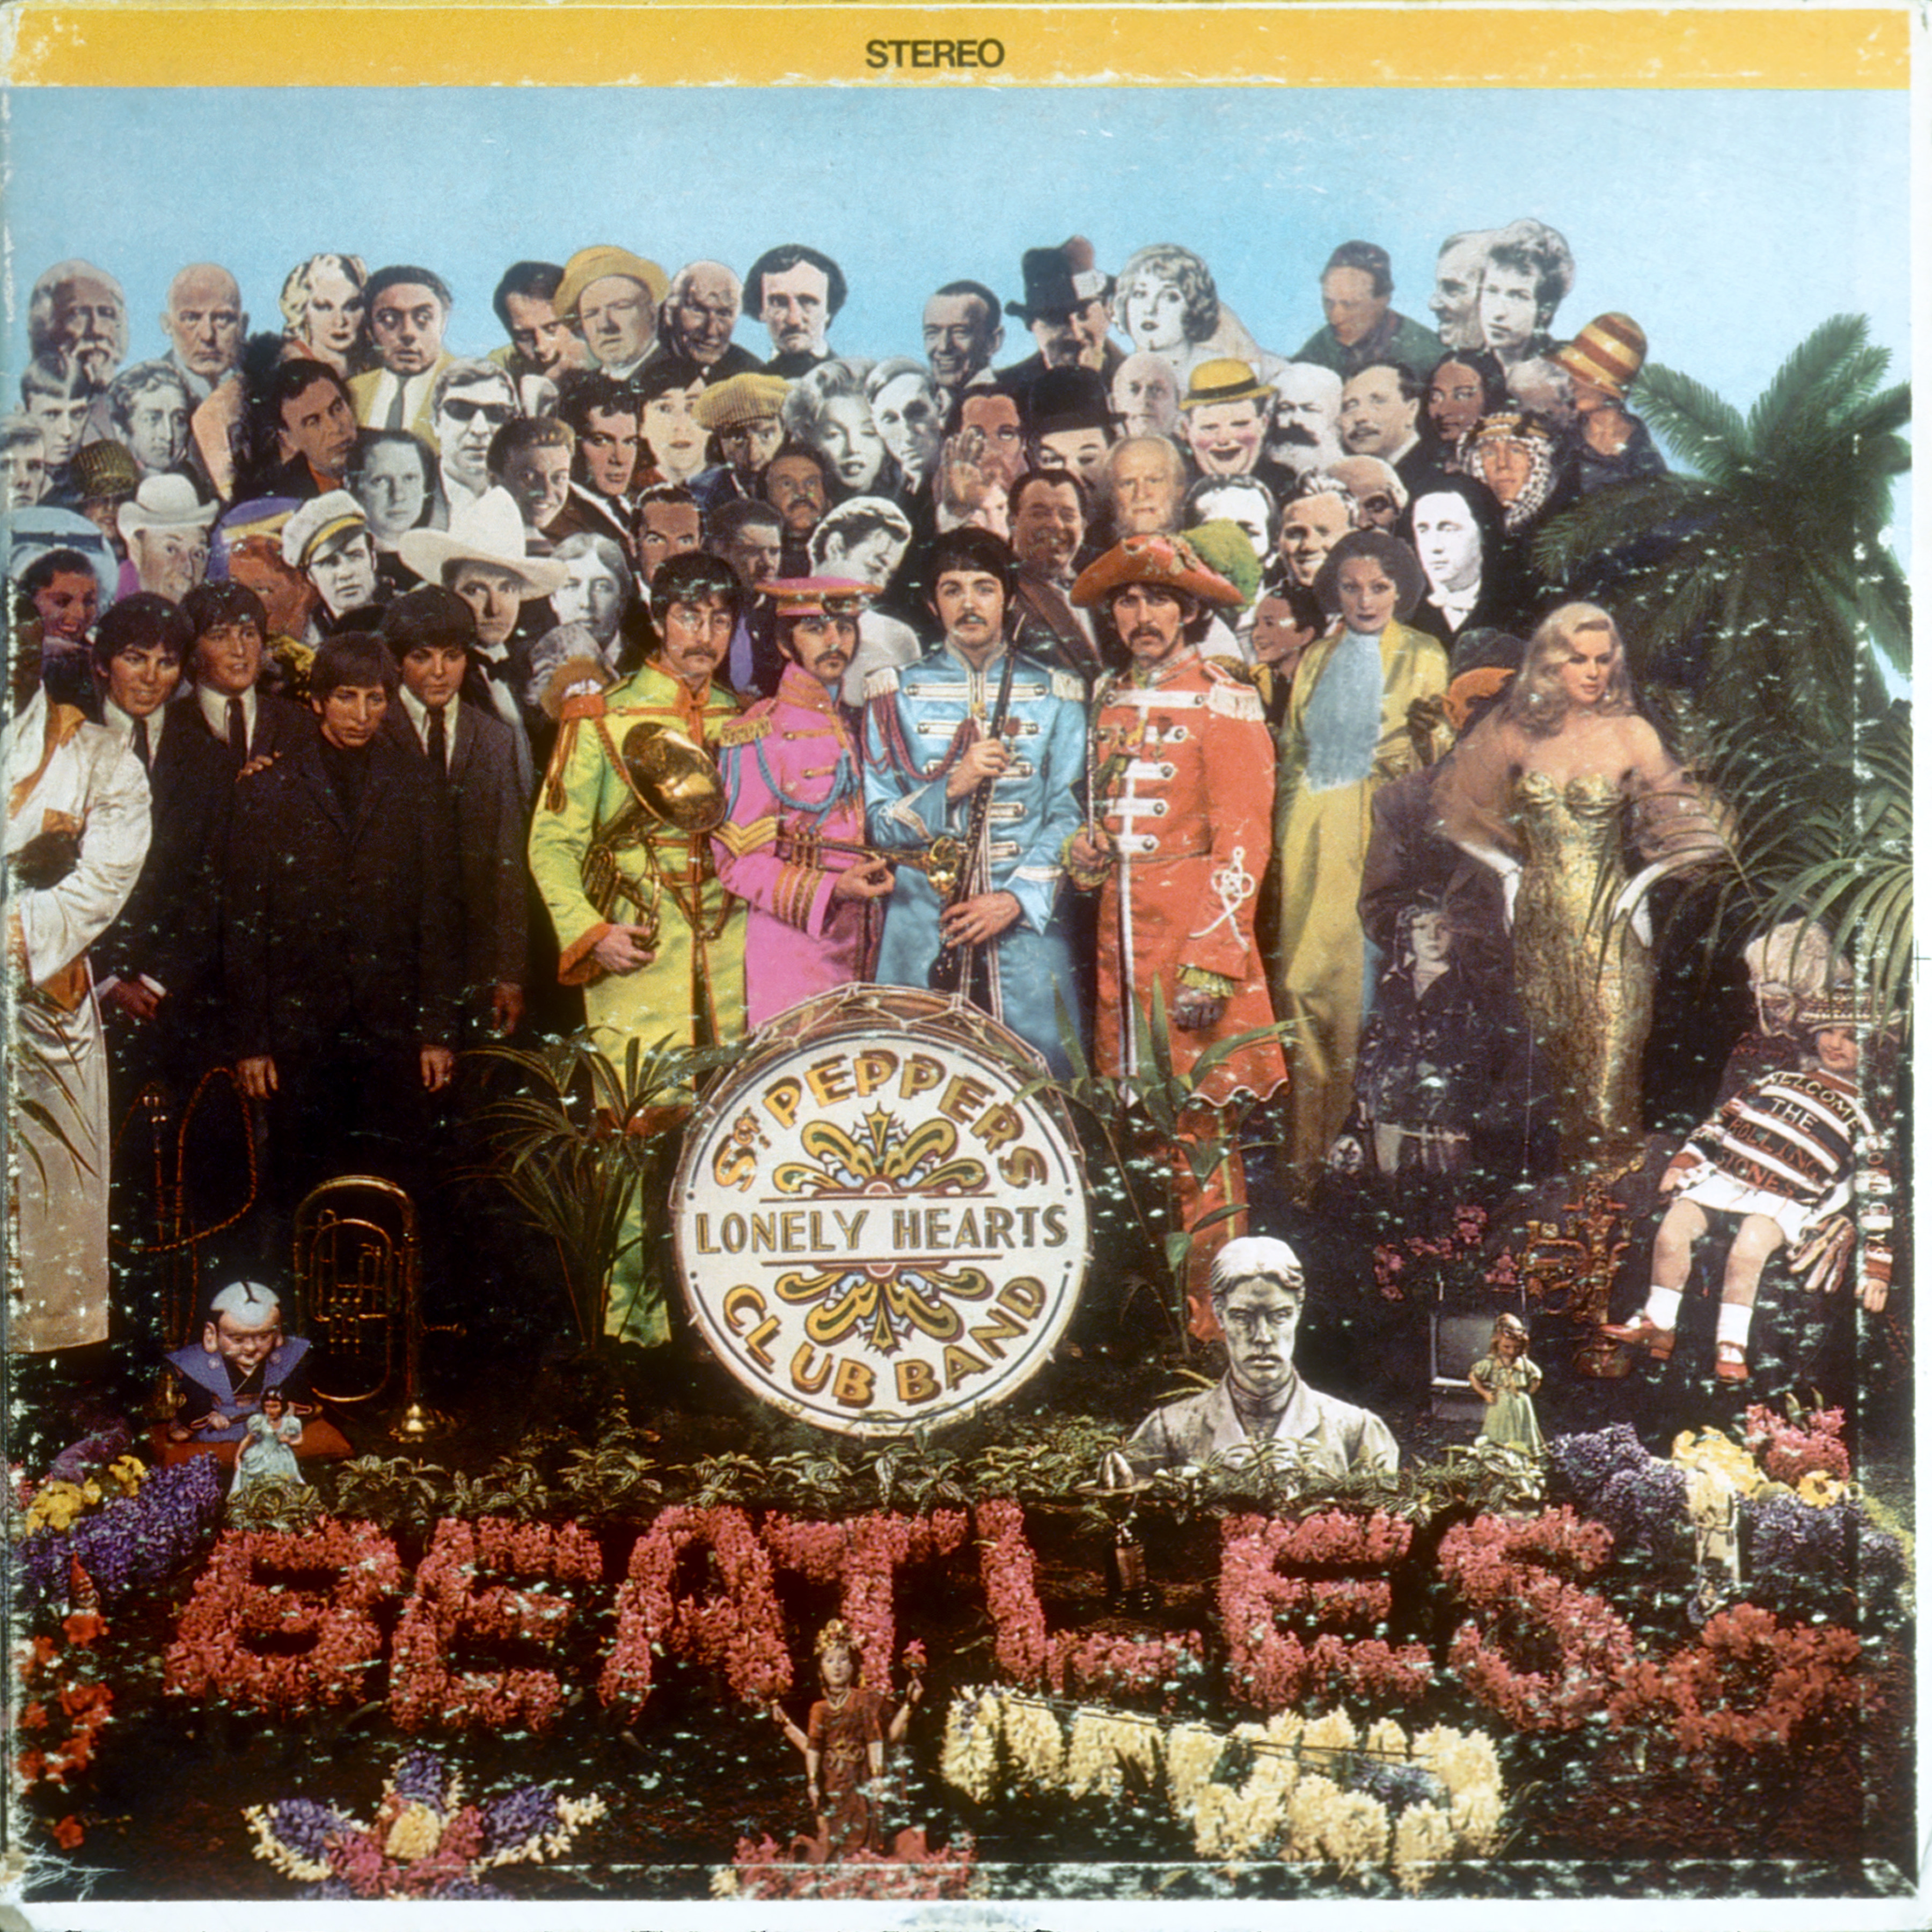 Album cover designed by art director Robert Fraser for The Beatles album <i>Sgt. Pepper's Lonely Hearts Club Band</i> which was released on June 1, 1967. (Michael Ochs Archives—Getty Images)